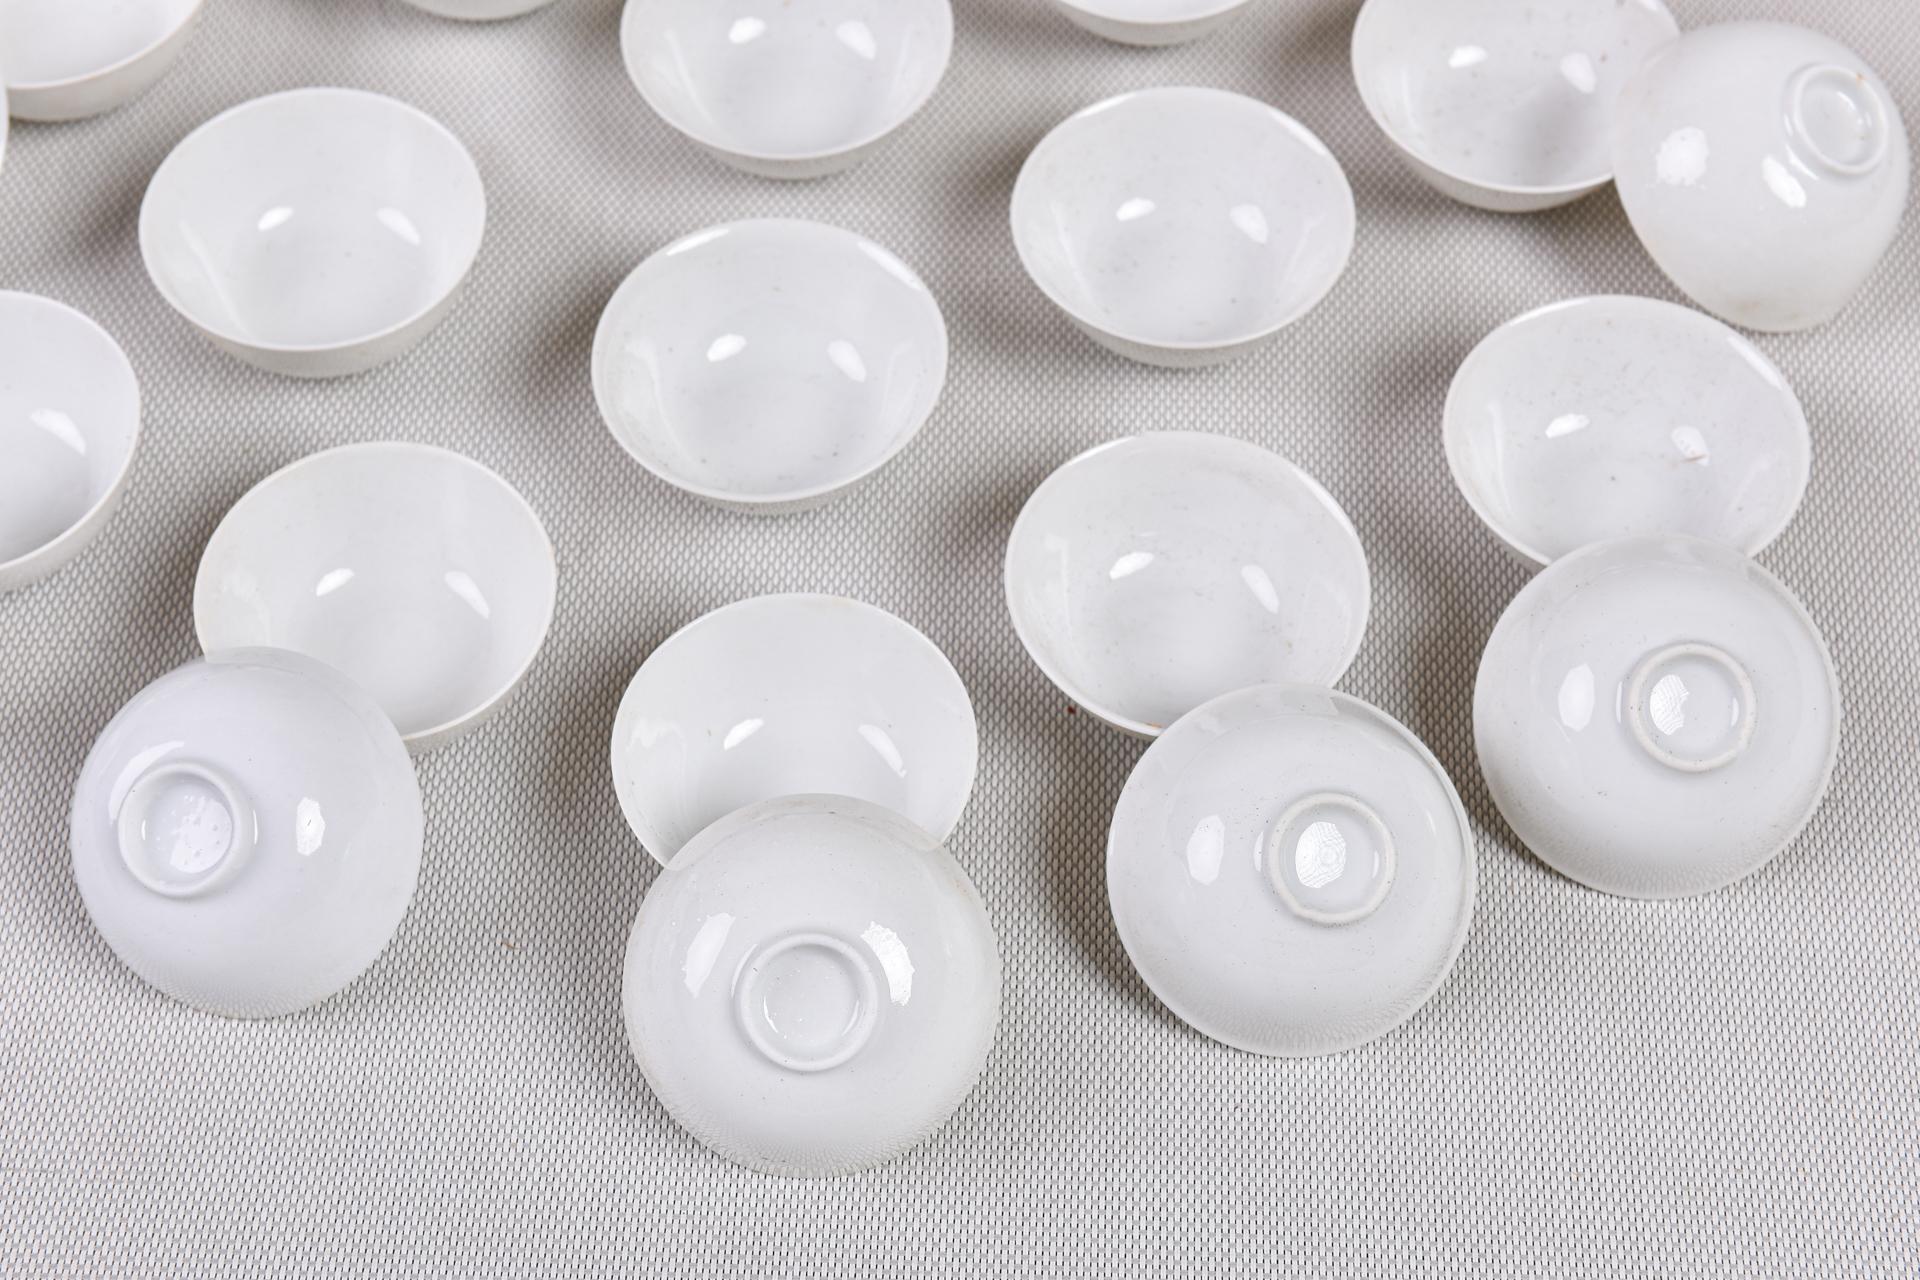 180 Small Bowls in Very Fine White Porcelain For Sale 2